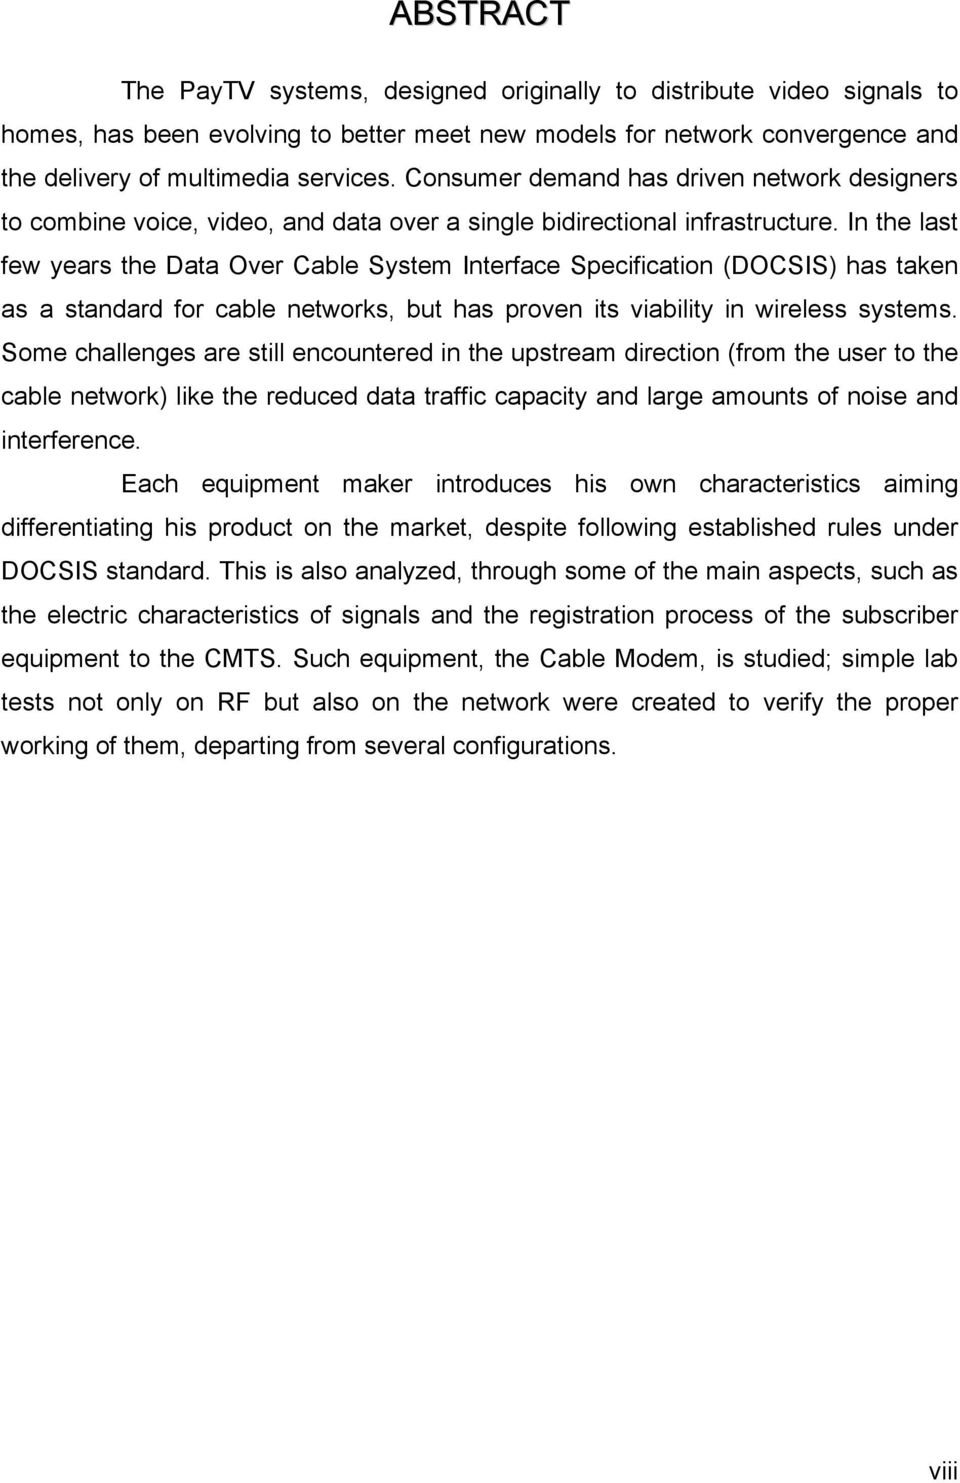 In the last few years the Data Over Cable System Interface Specification (DOCSIS) has taken as a standard for cable networks, but has proven its viability in wireless systems.